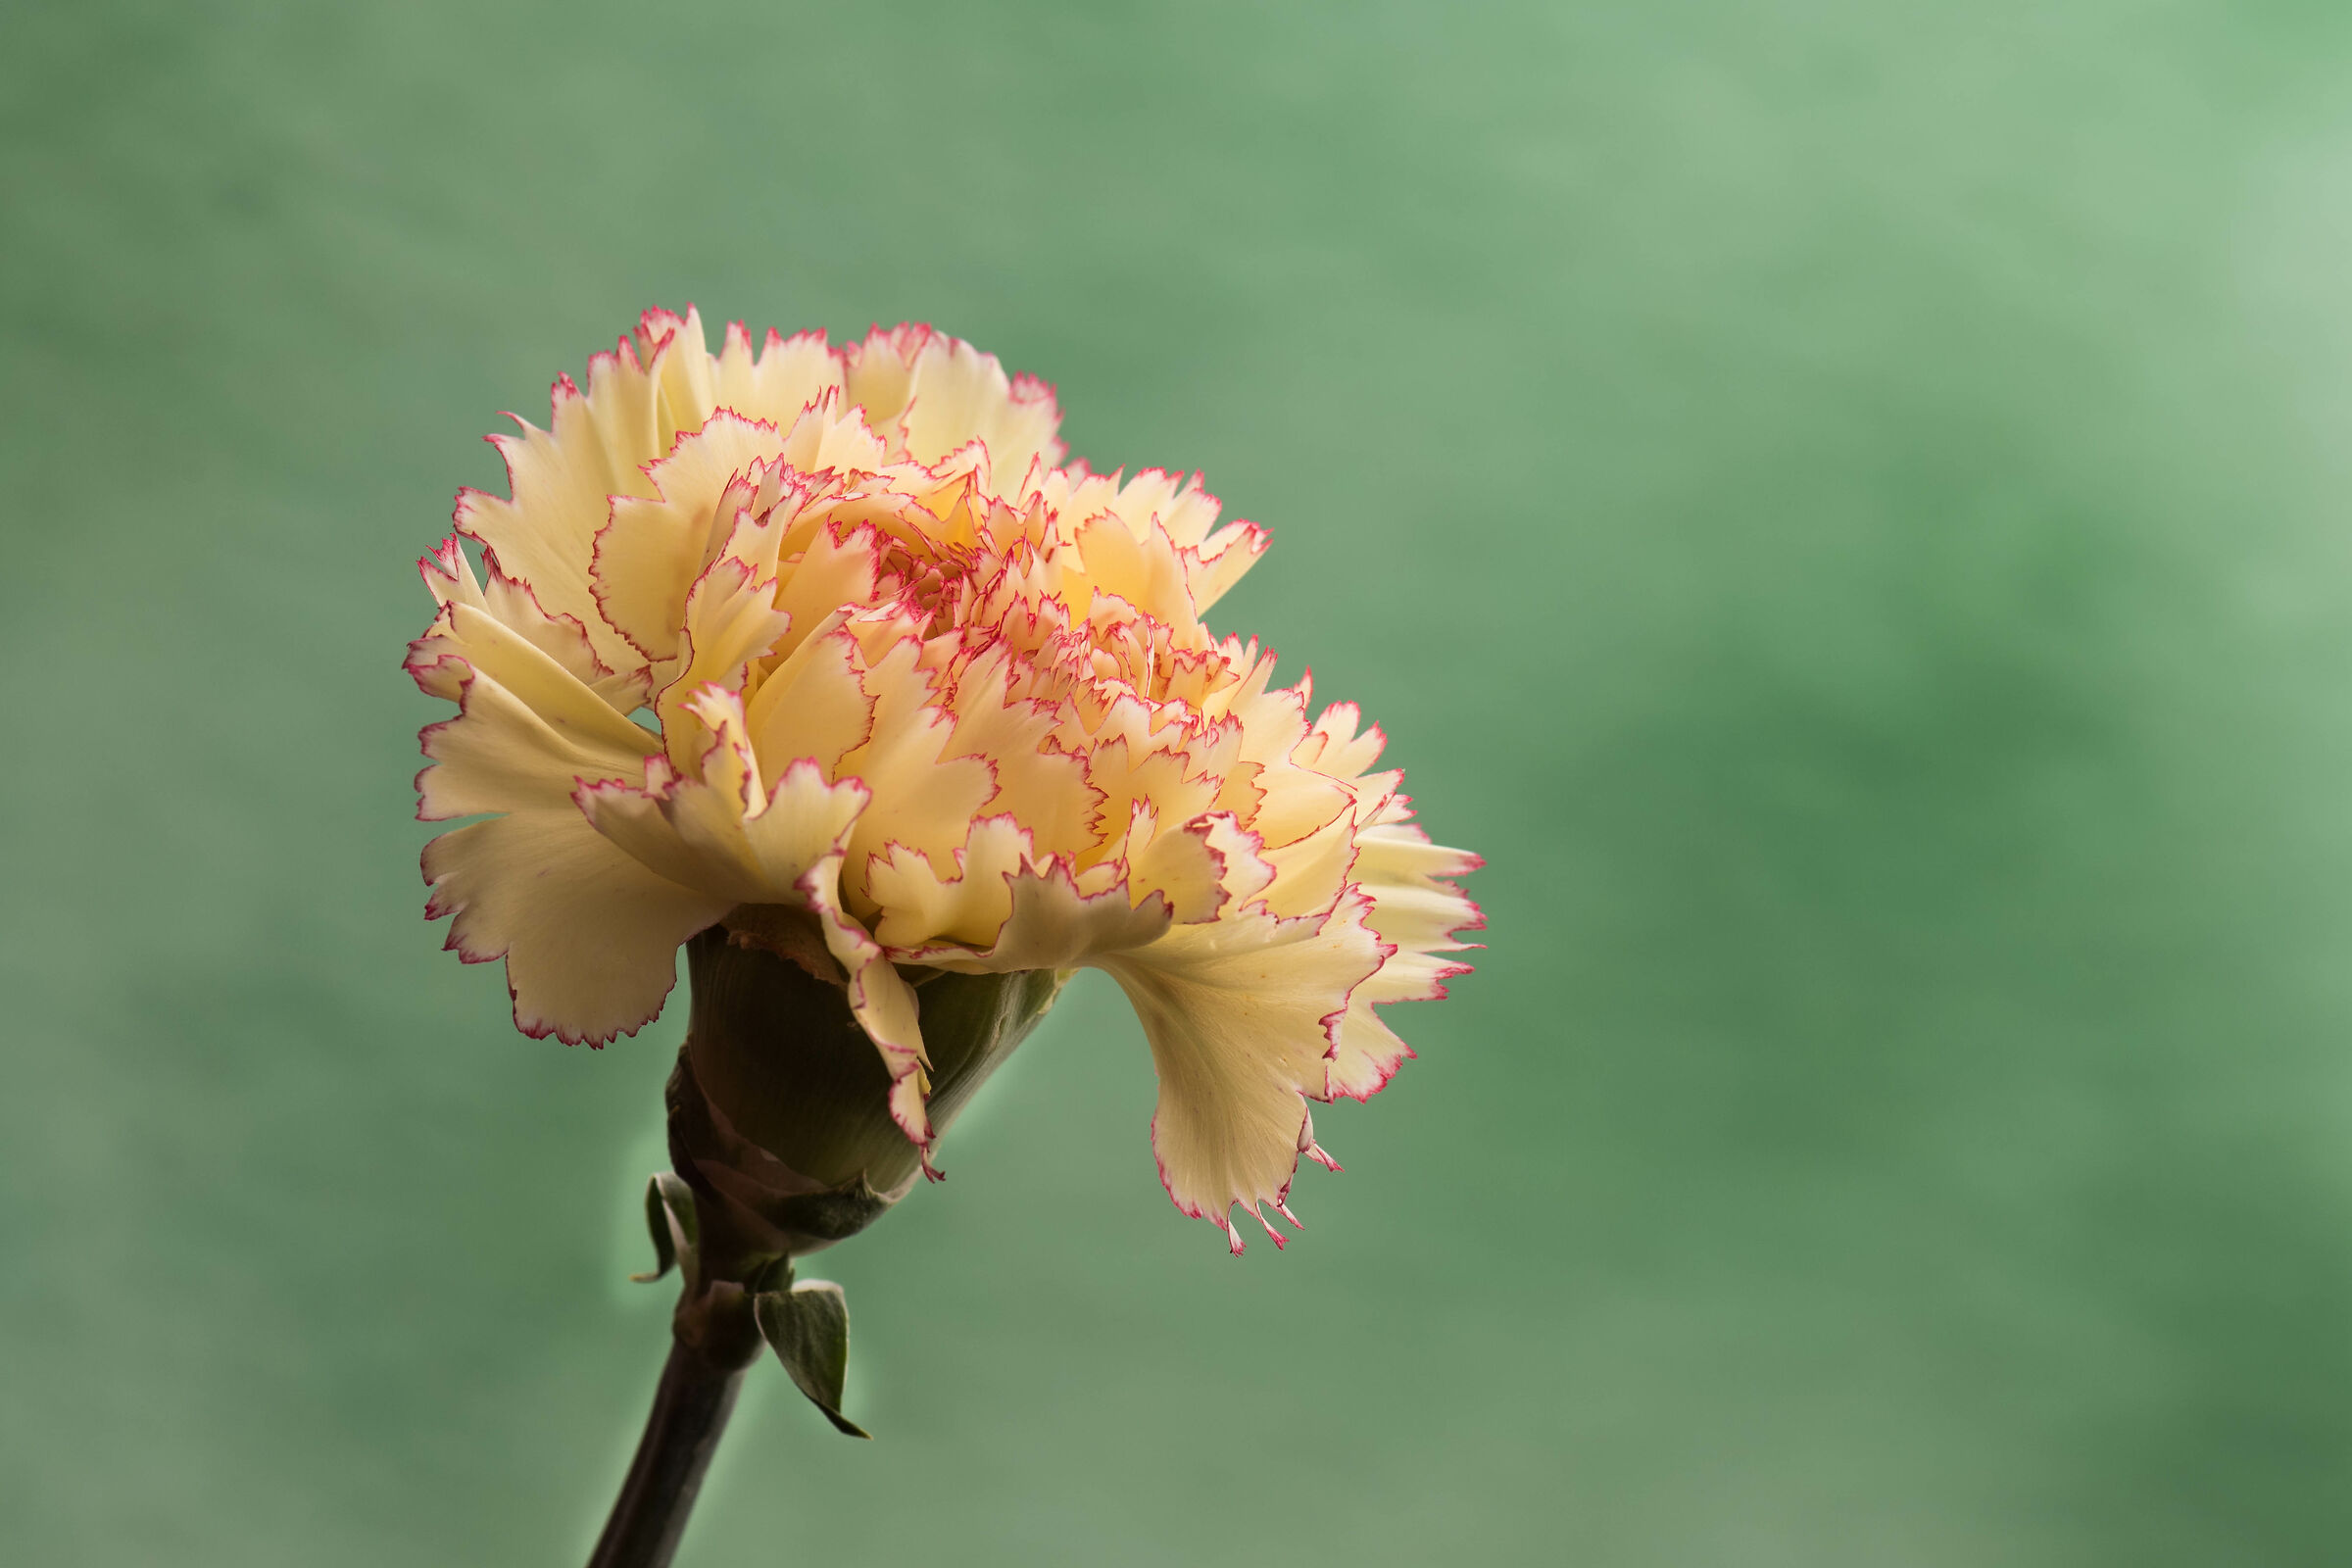 Yellow carnation with petals bordered in red...